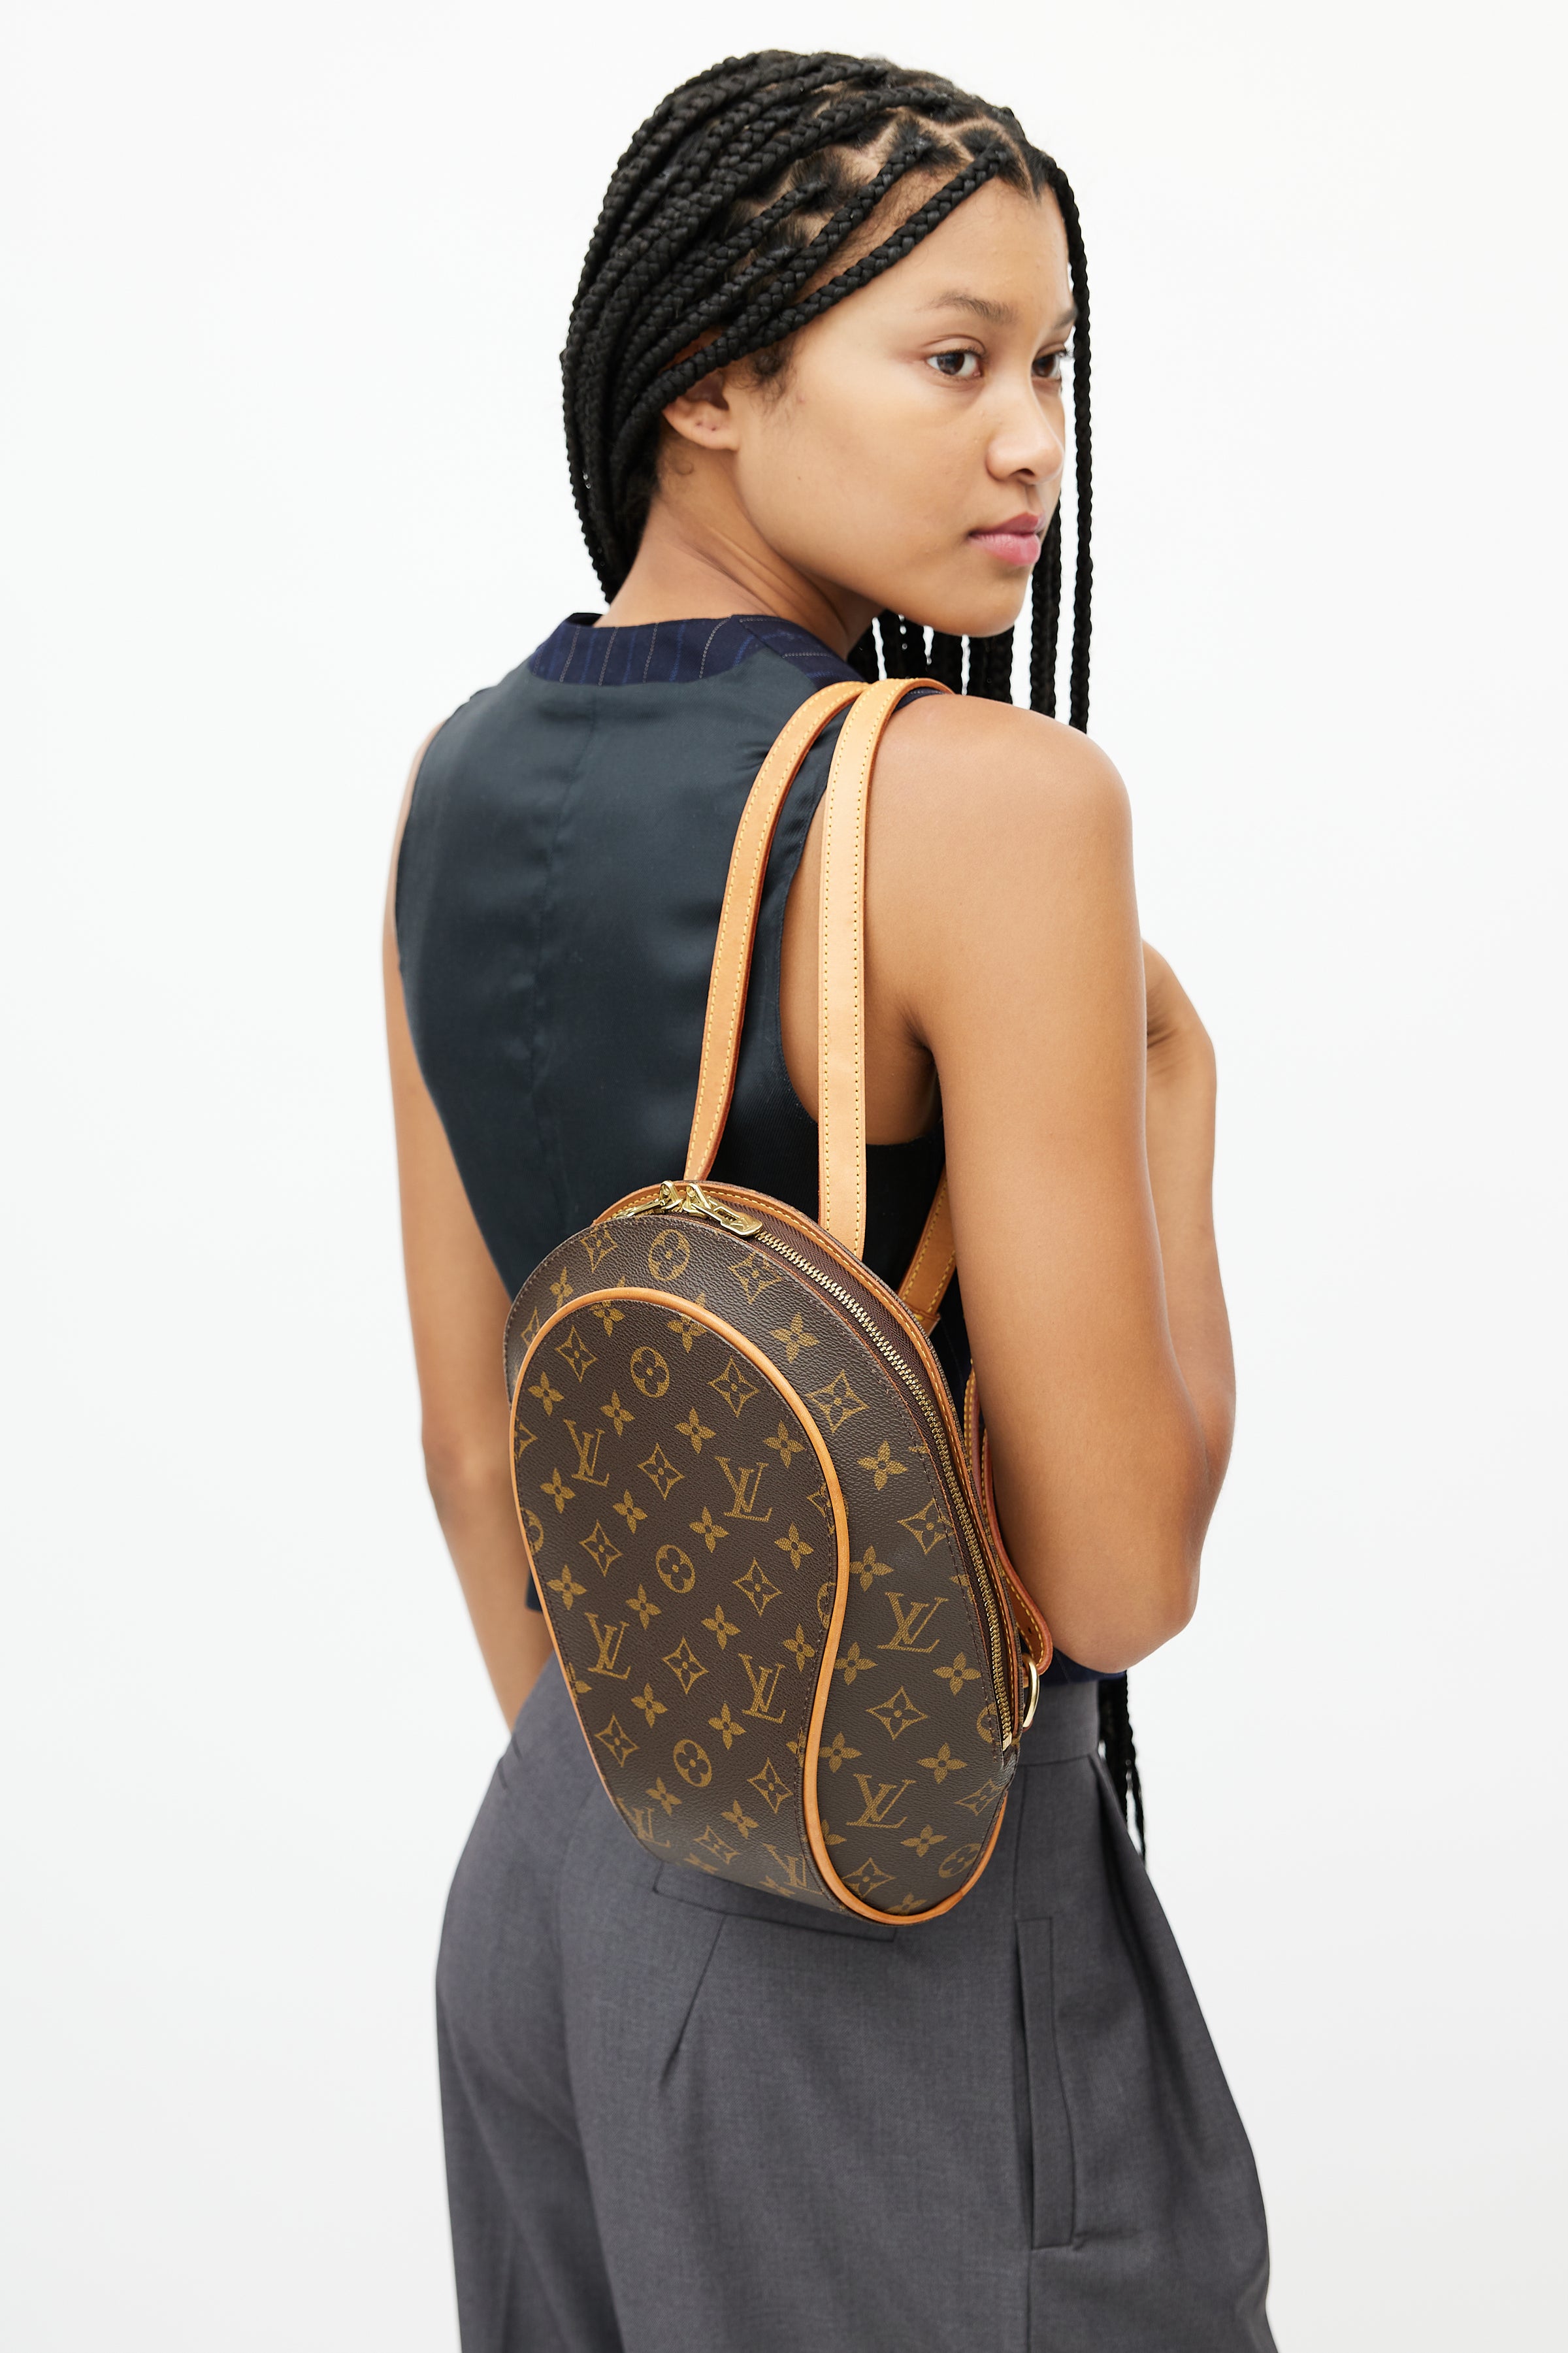 Louis Vuitton Monogram Ellipse Sac a Dos Backpack Made In France